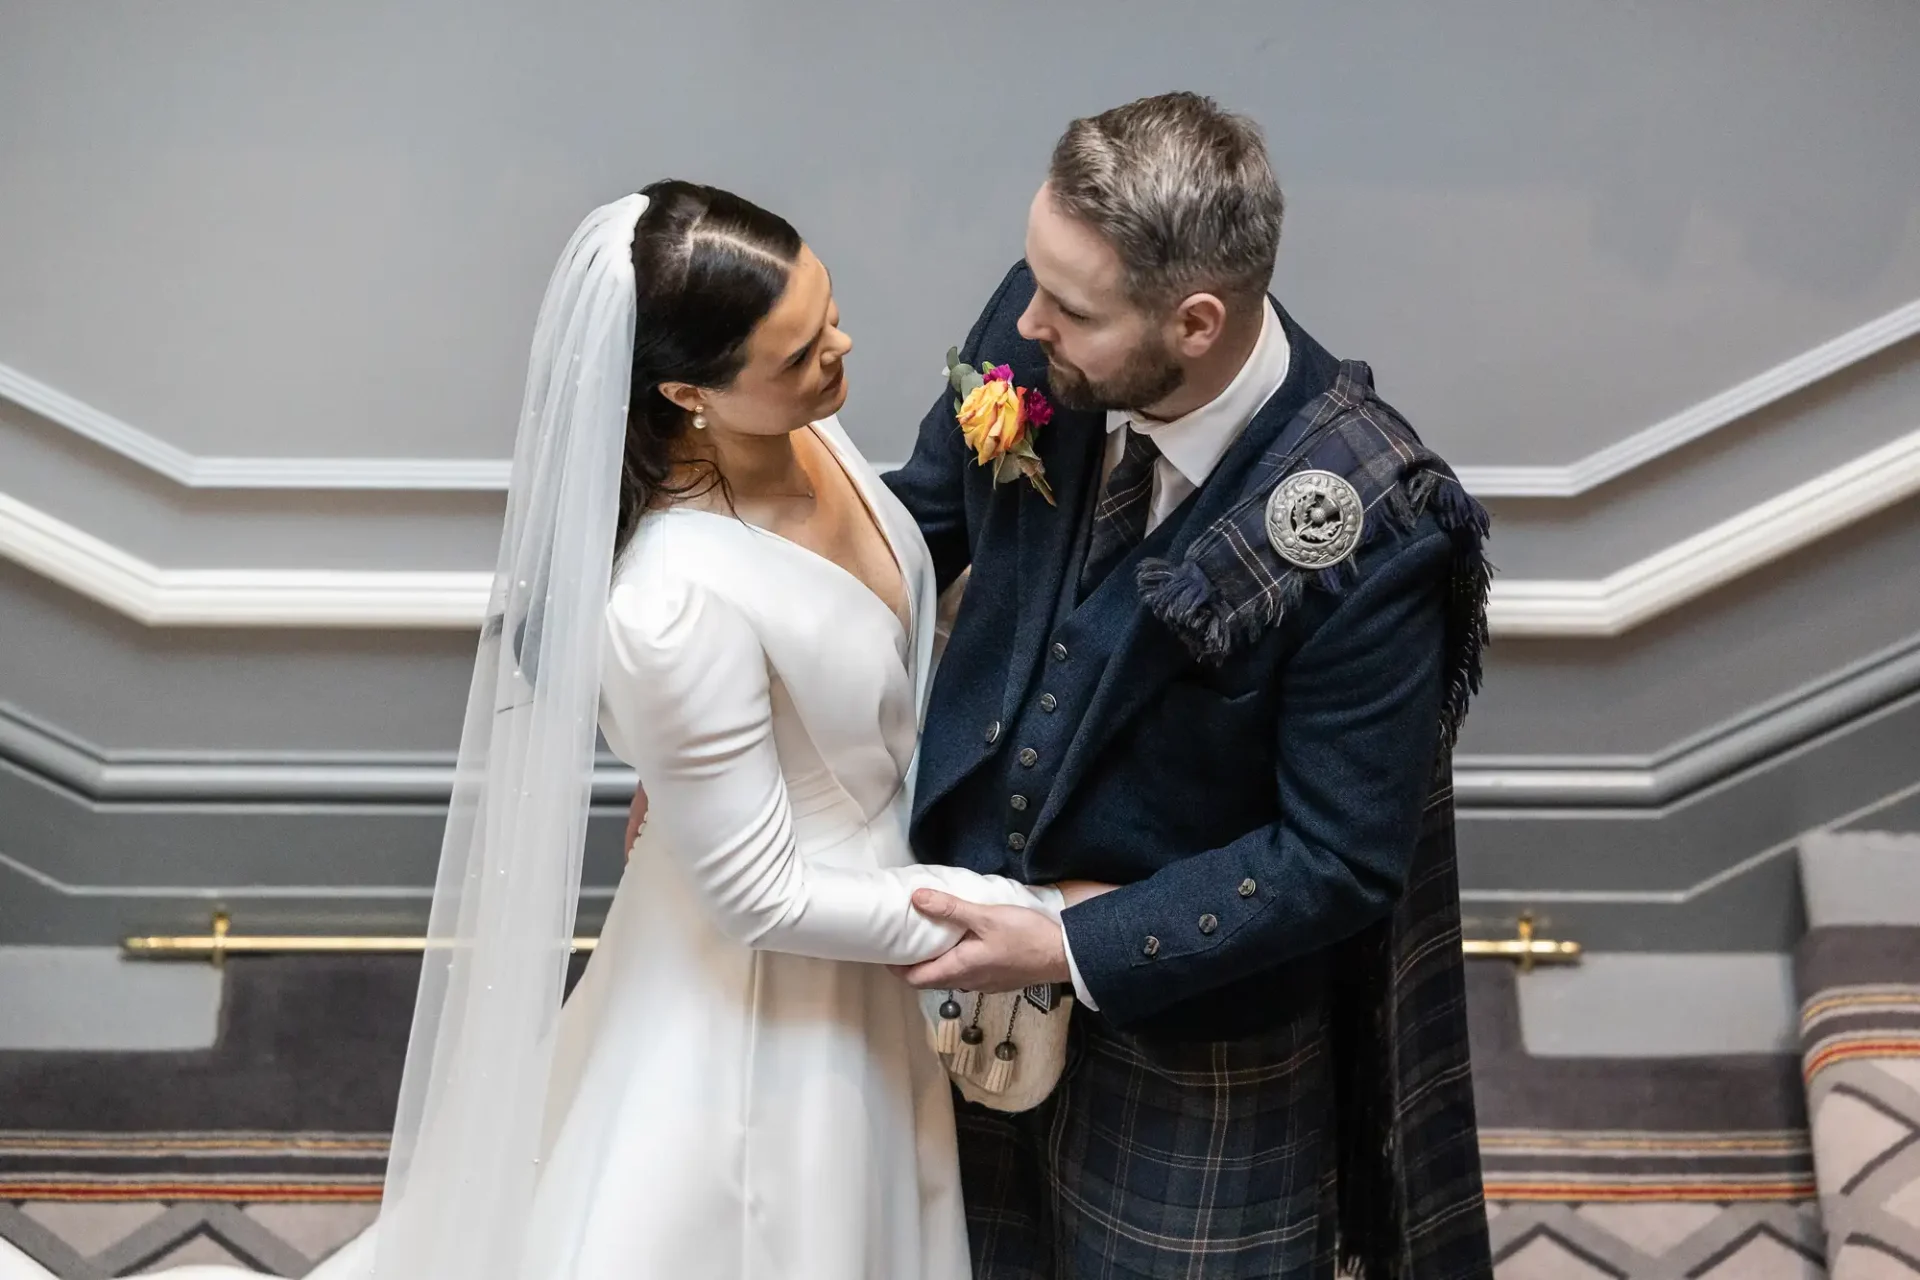 Bride in a white dress and groom in a kilt sharing a tender moment on a staircase, touching foreheads lovingly.